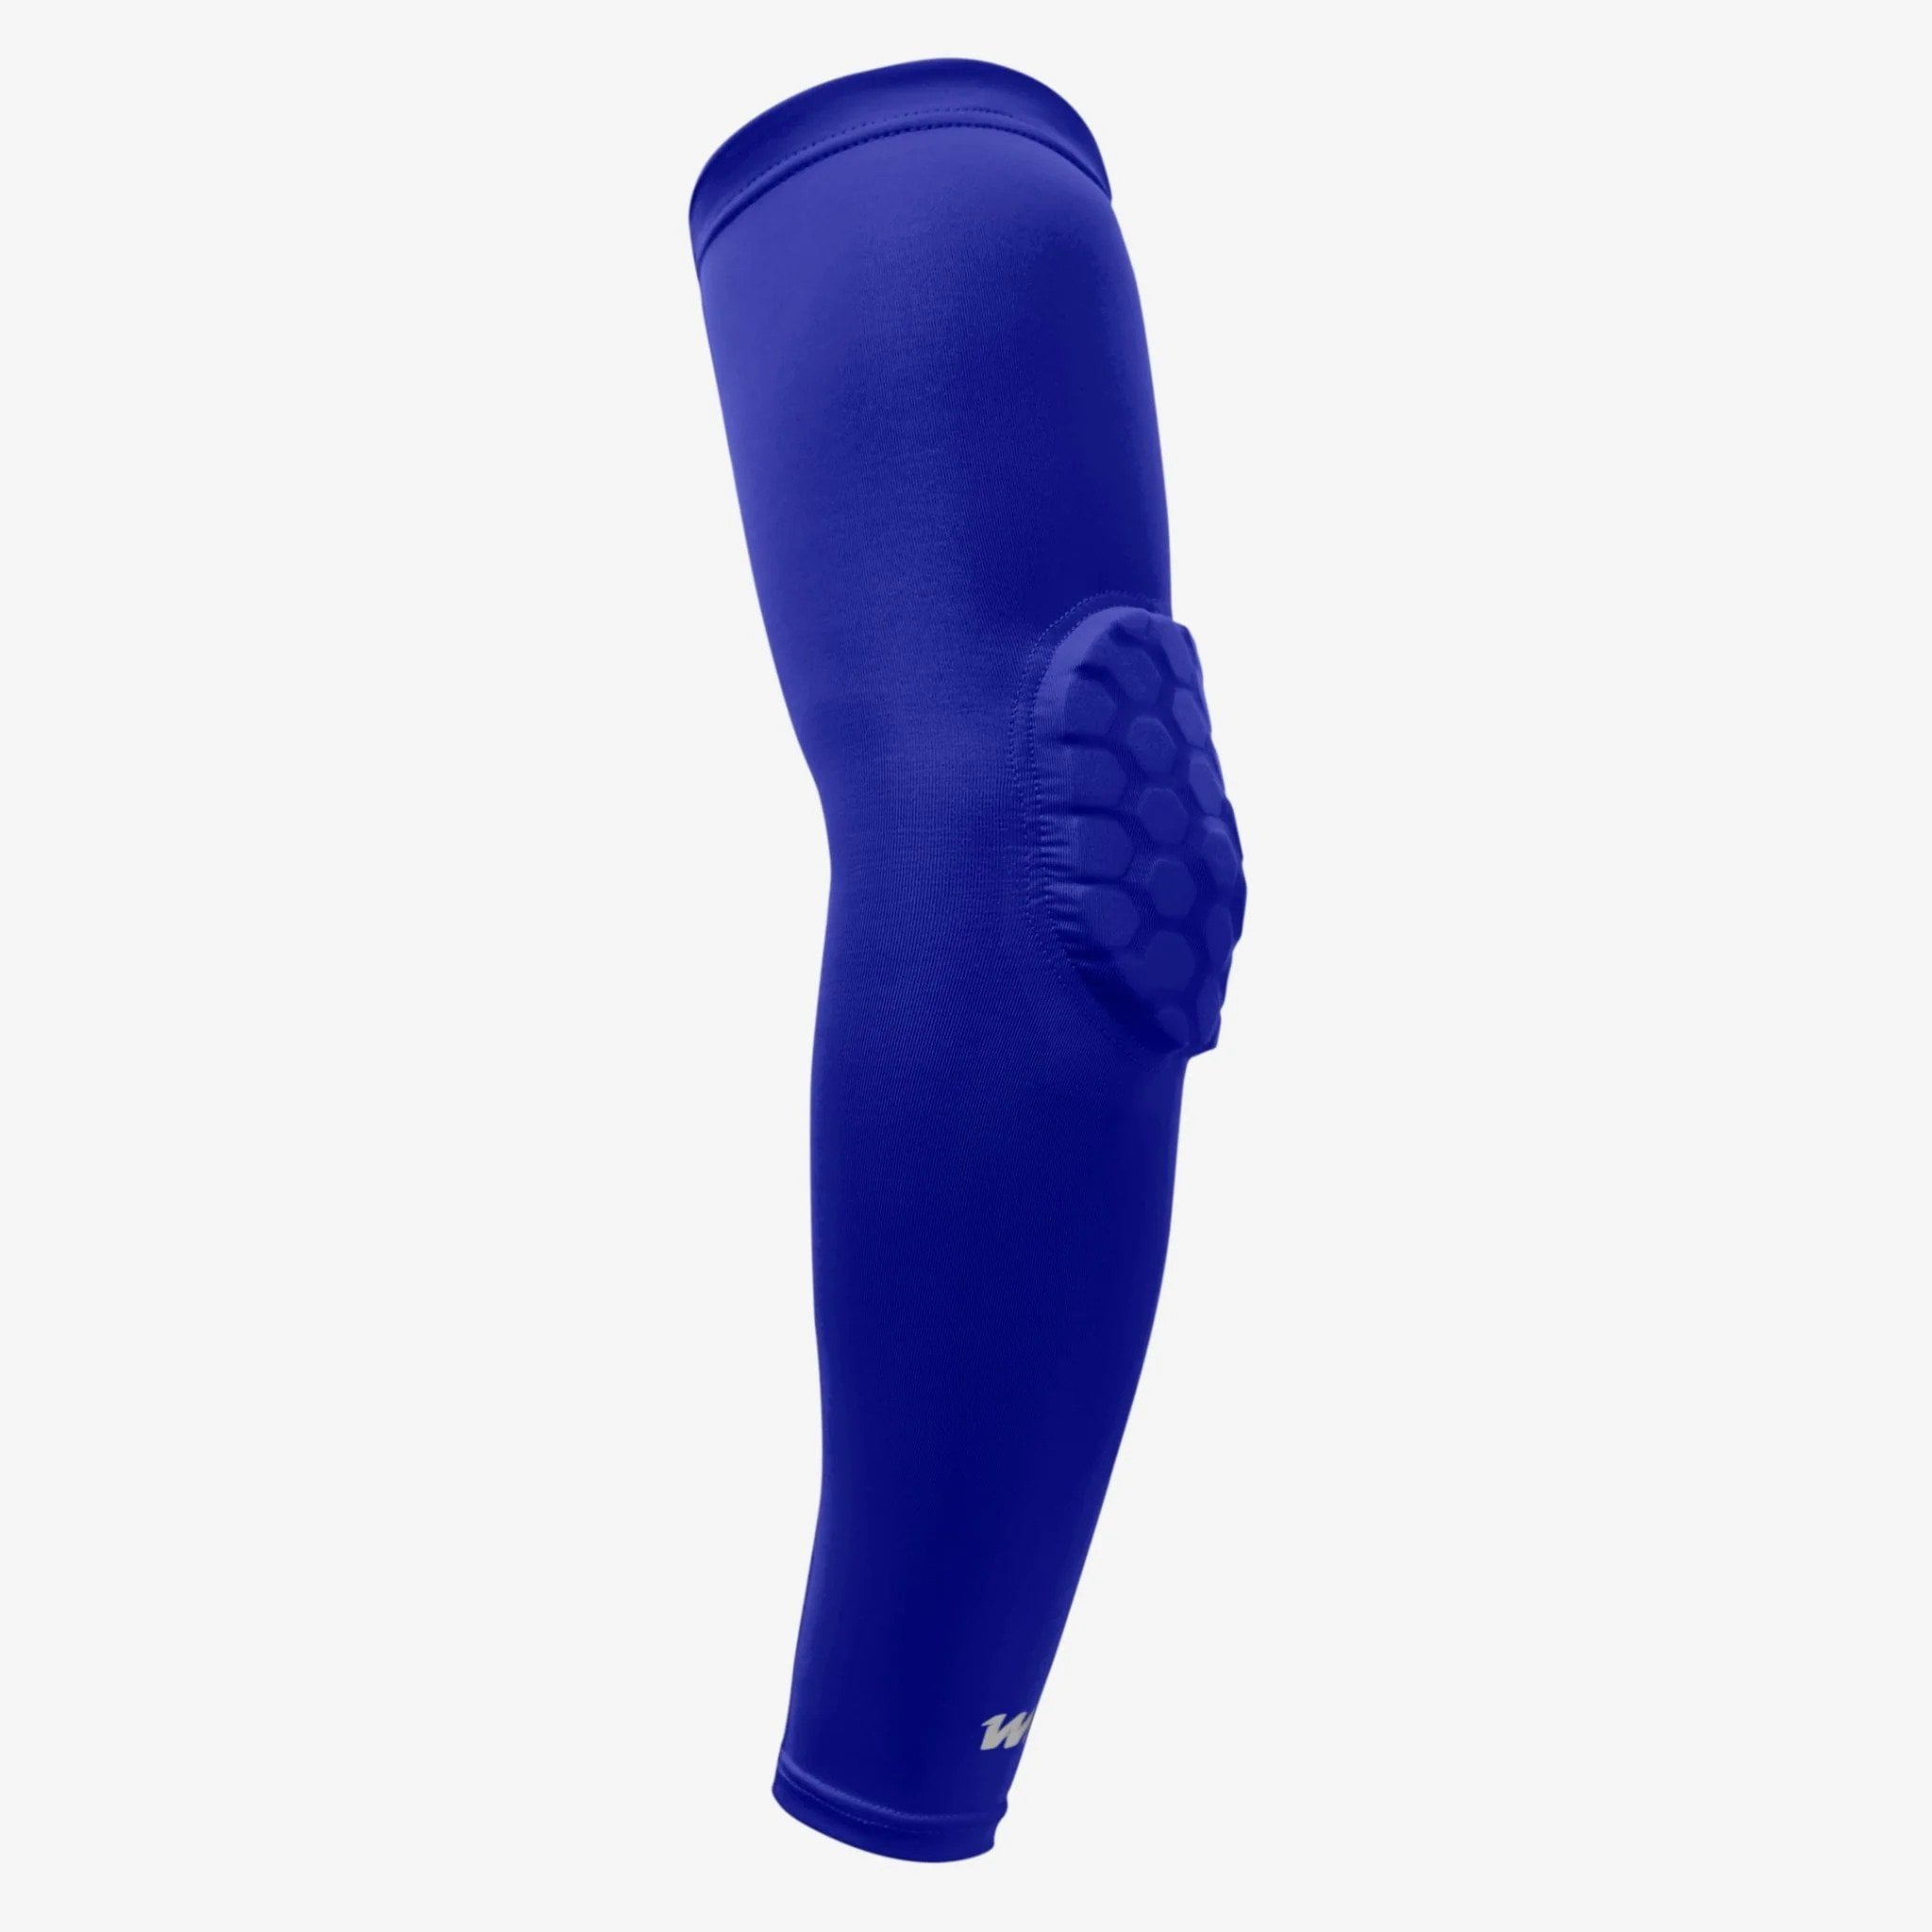 Bauerfeind Sports Compression Arm Sleeves - Durable & Washable